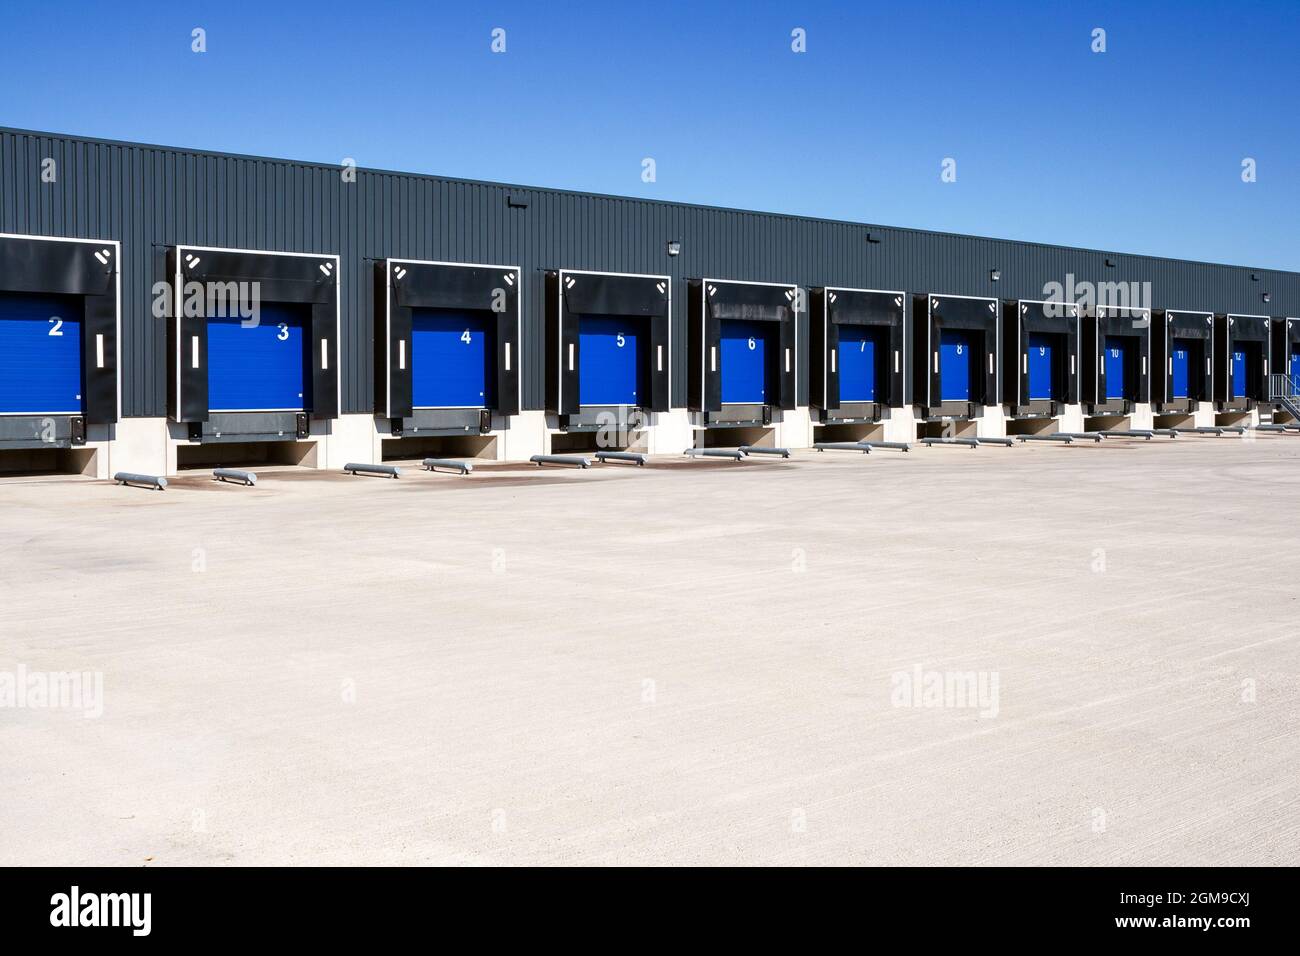 Row of loading docks with shutter doors at an industrial warehouse. Stock Photo